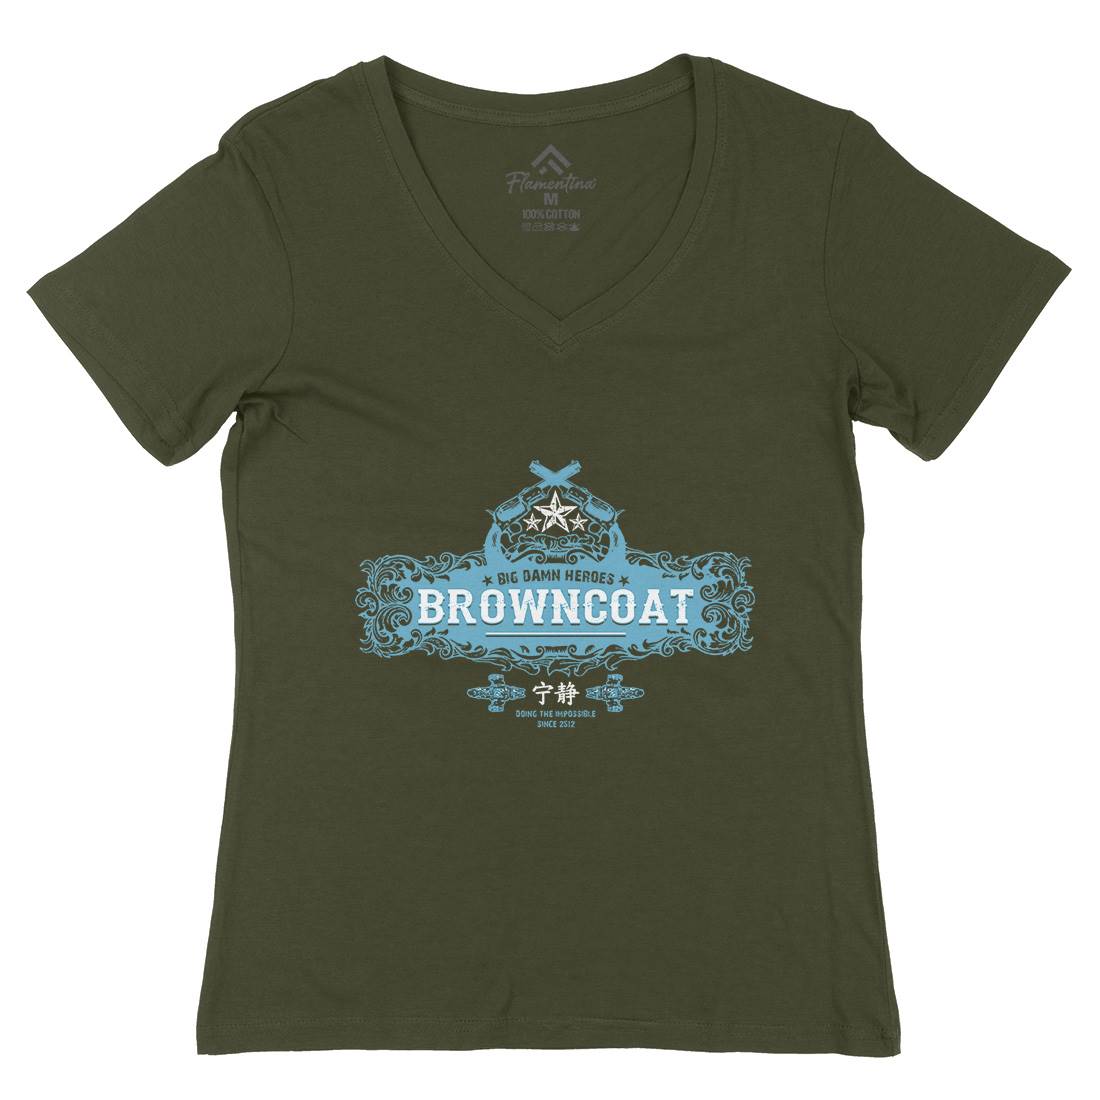 Browncoat Womens Organic V-Neck T-Shirt Space D350